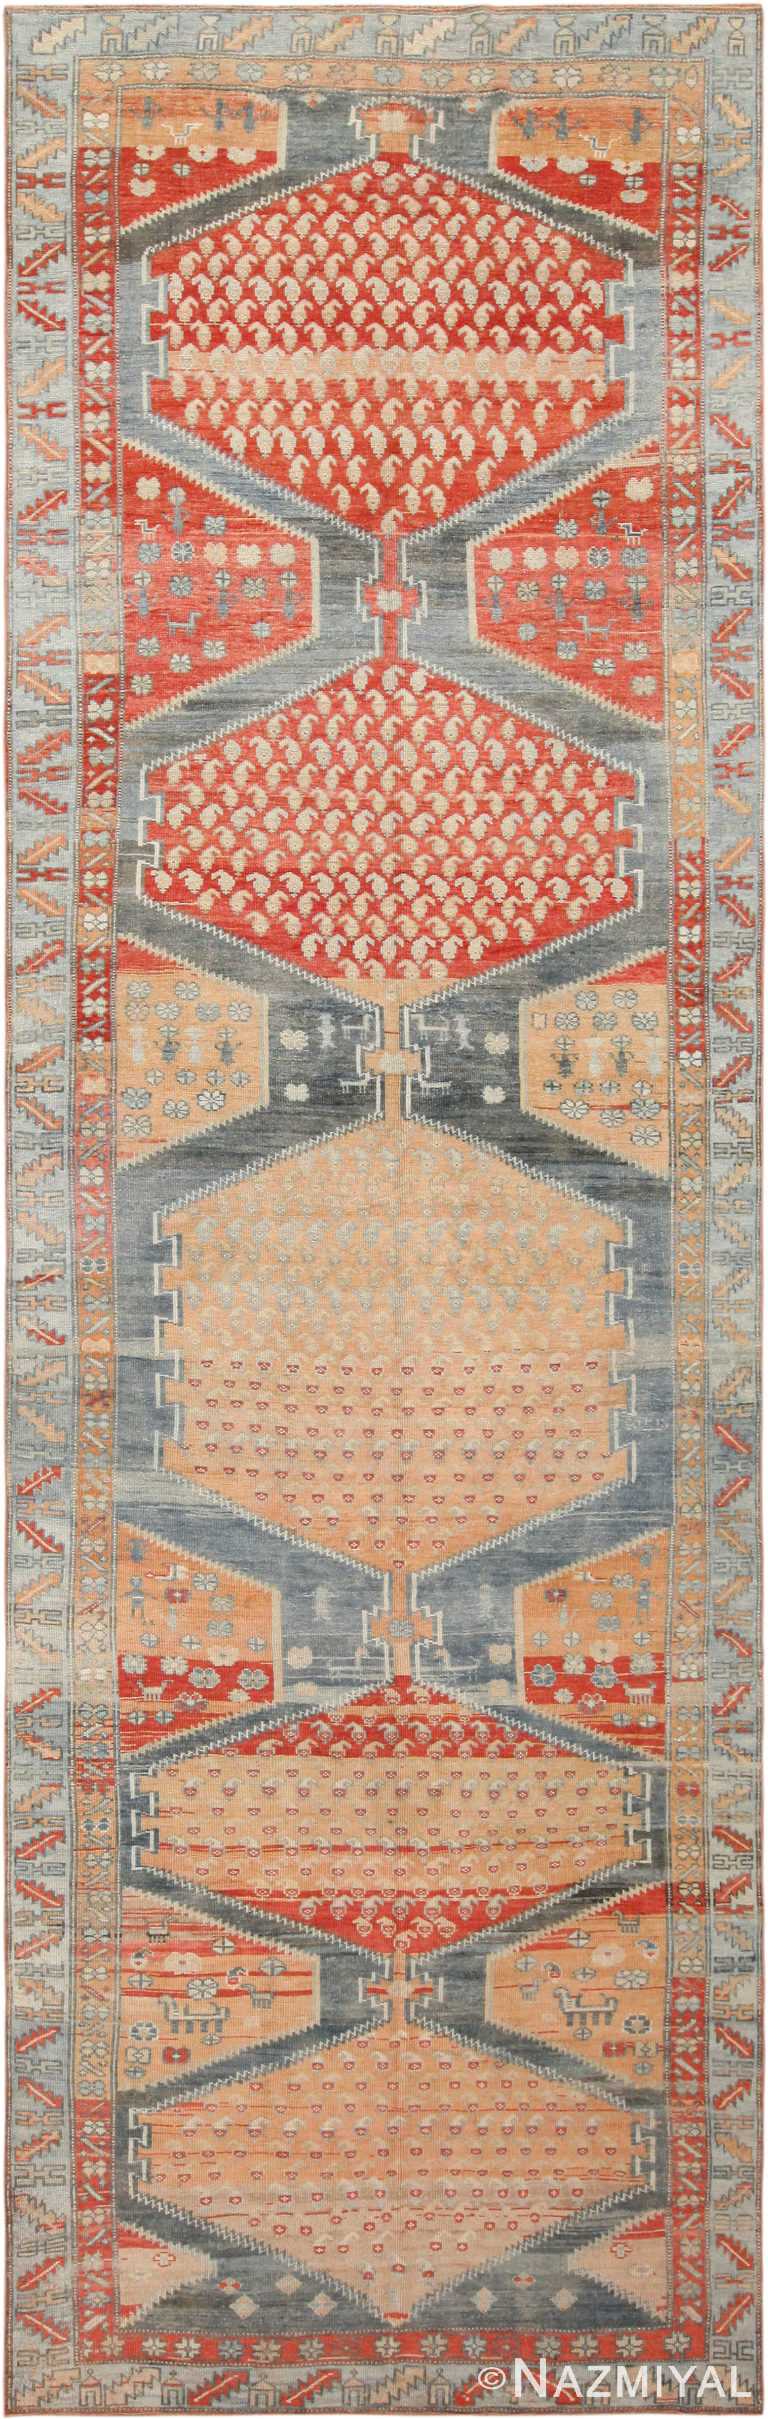 Antique North West Persian Gallery Size Rug 72150 by Nazmiyal Antique Rugs